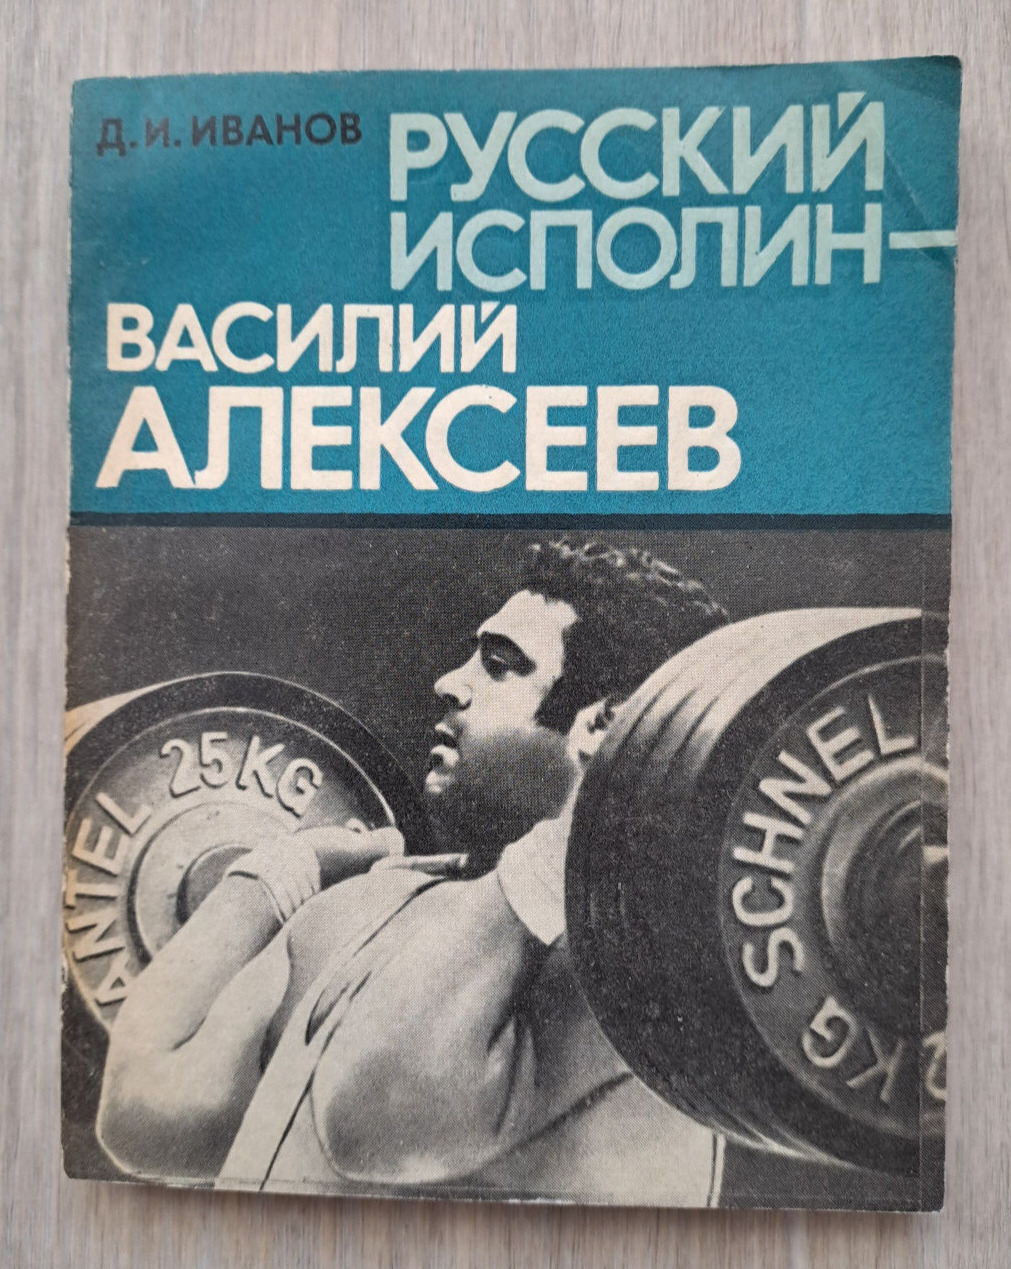 1980 Russian giant Vasily Alekseev Champion Weightlifter Barbell Biography book